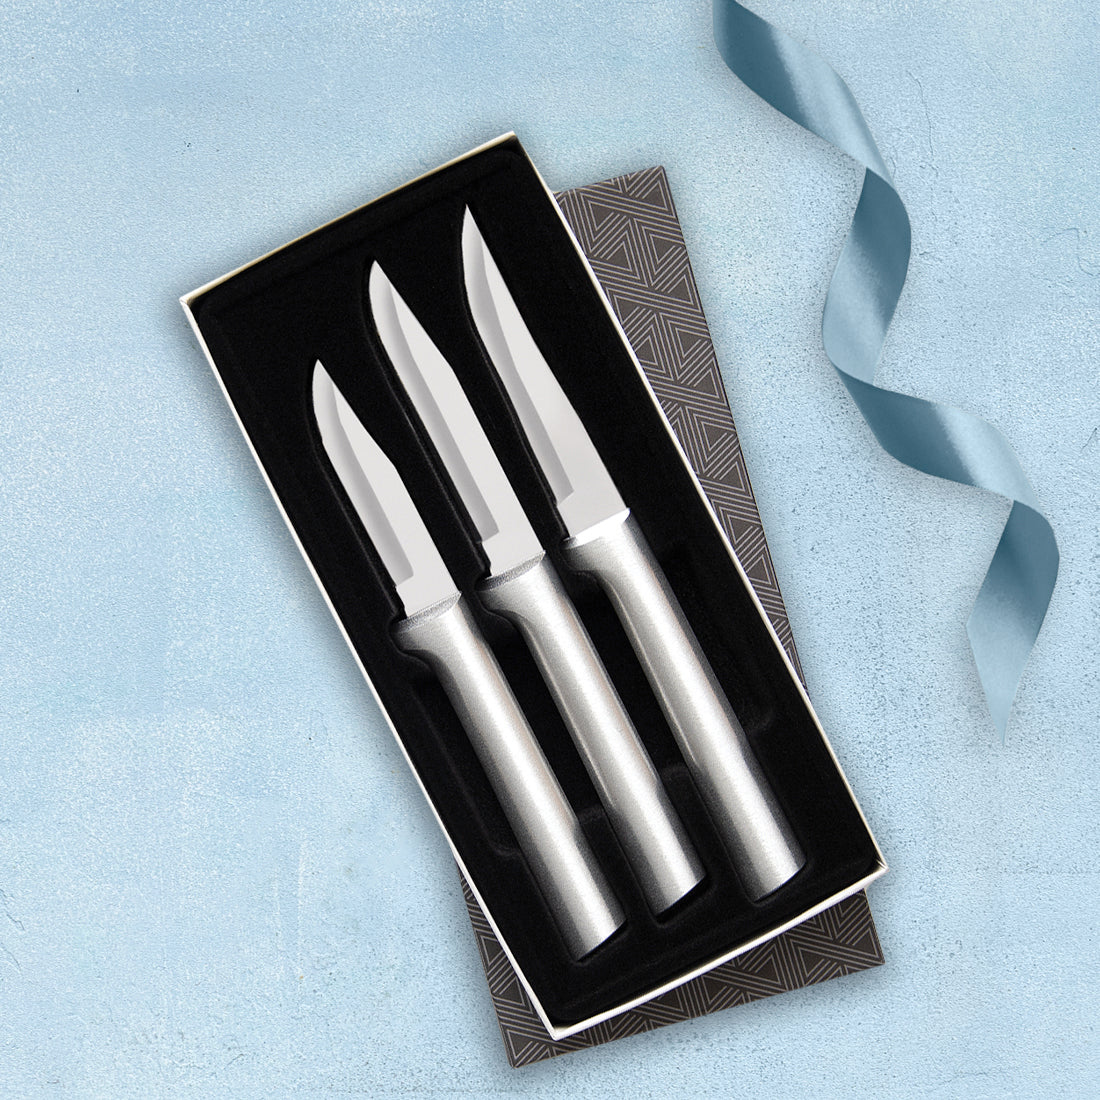 Sale: Ultimate Utensil Gift Box Set by Rada Cutlery Made in USA